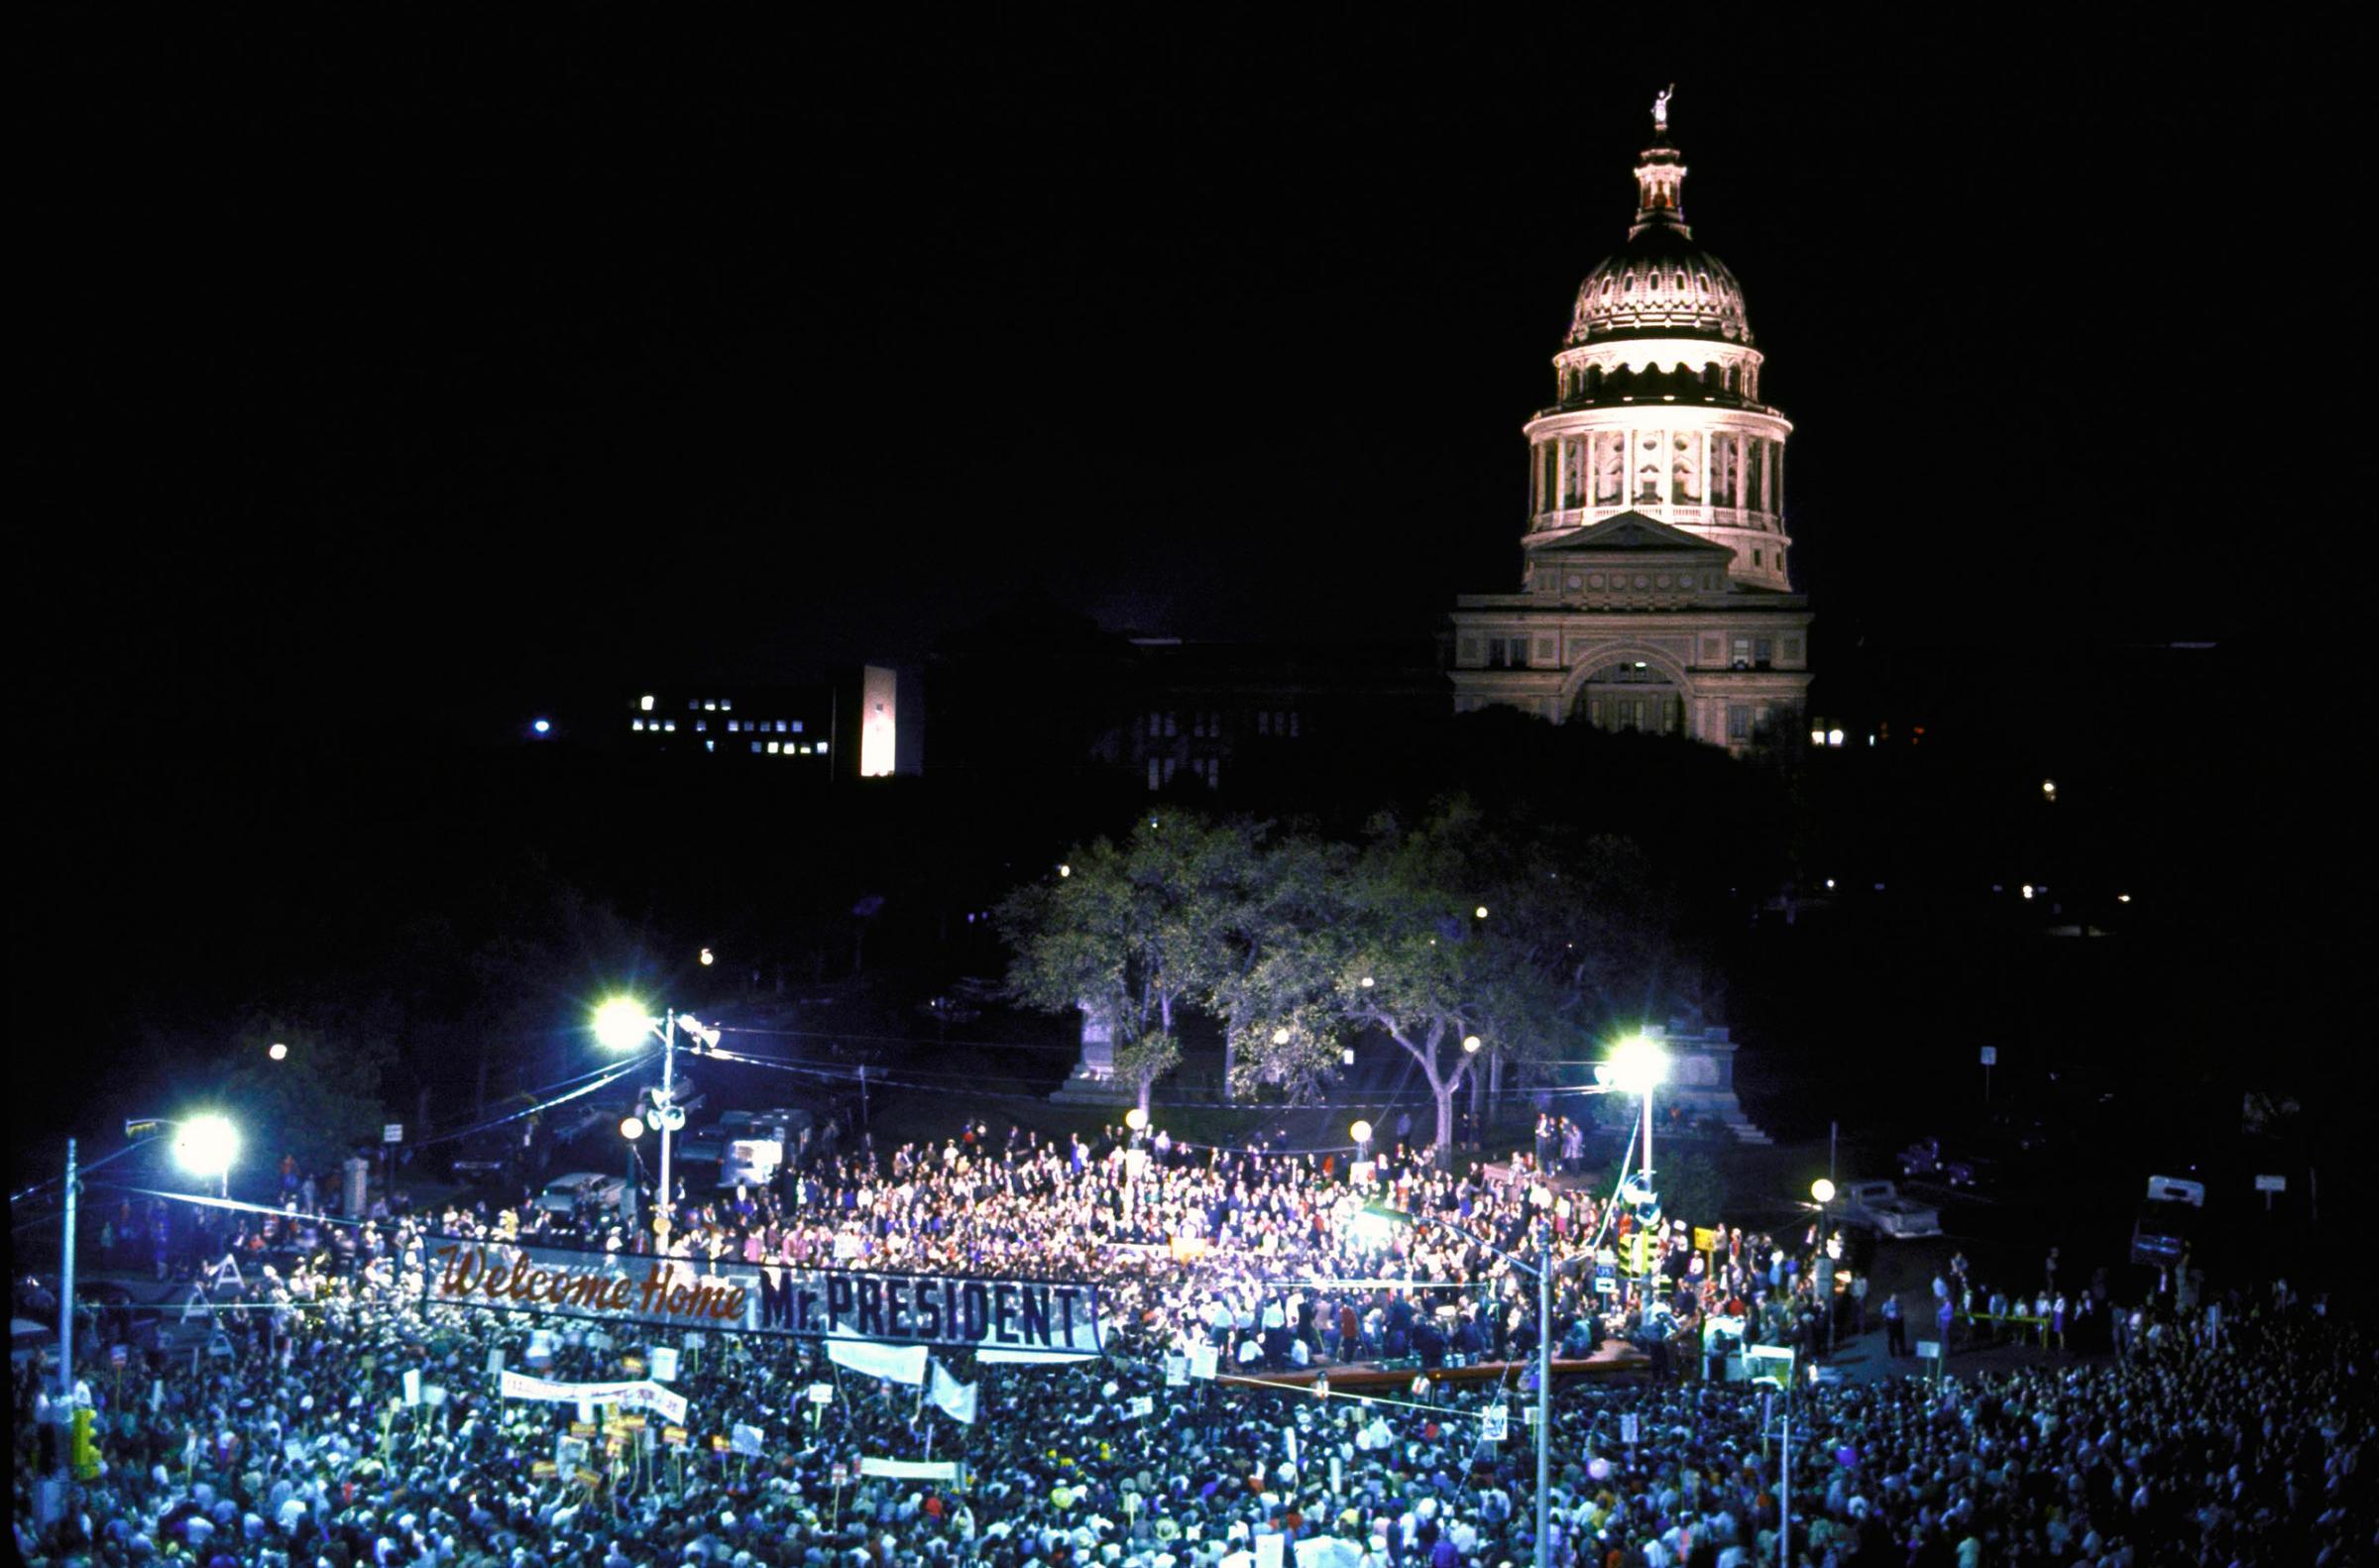 Touch of Texas. A raucous rally greeted the President's election eve homecoming in Austin.